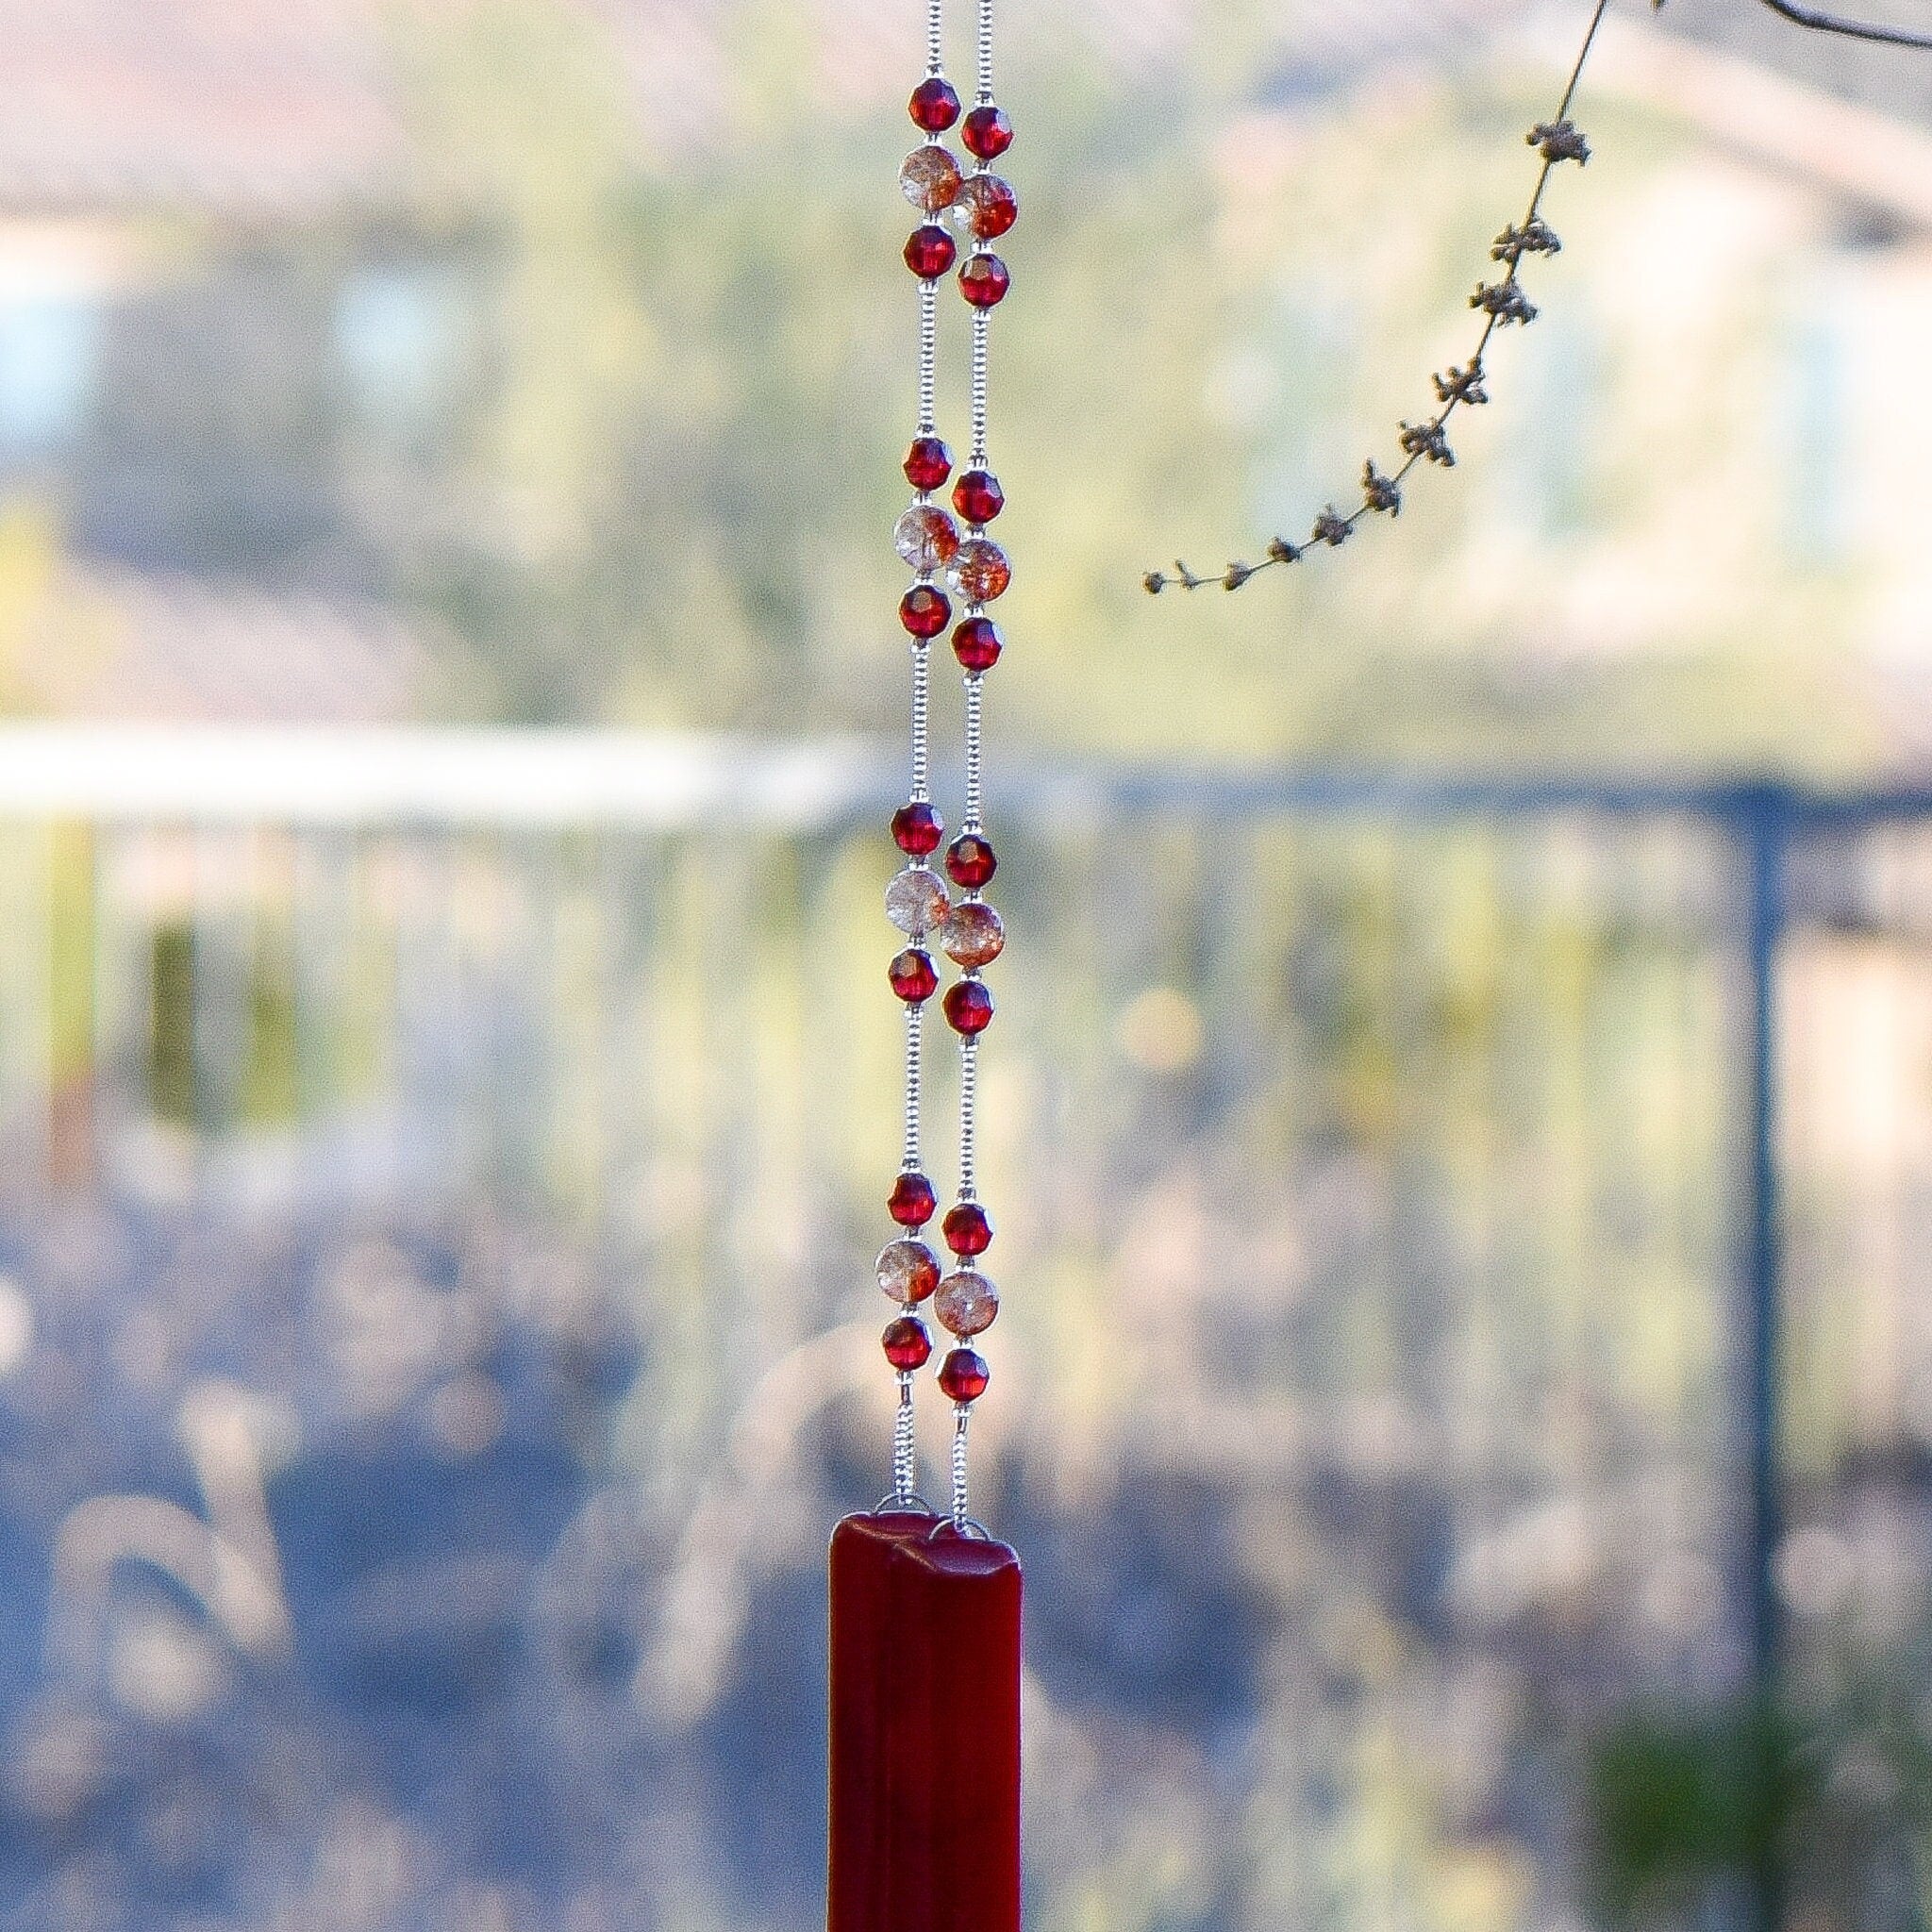 Handmade wind chime made with Red Ruby Moss Crystal stones flanked by Austrian crystal beads, anchored by two pieces of red fused glass, hanging from tree